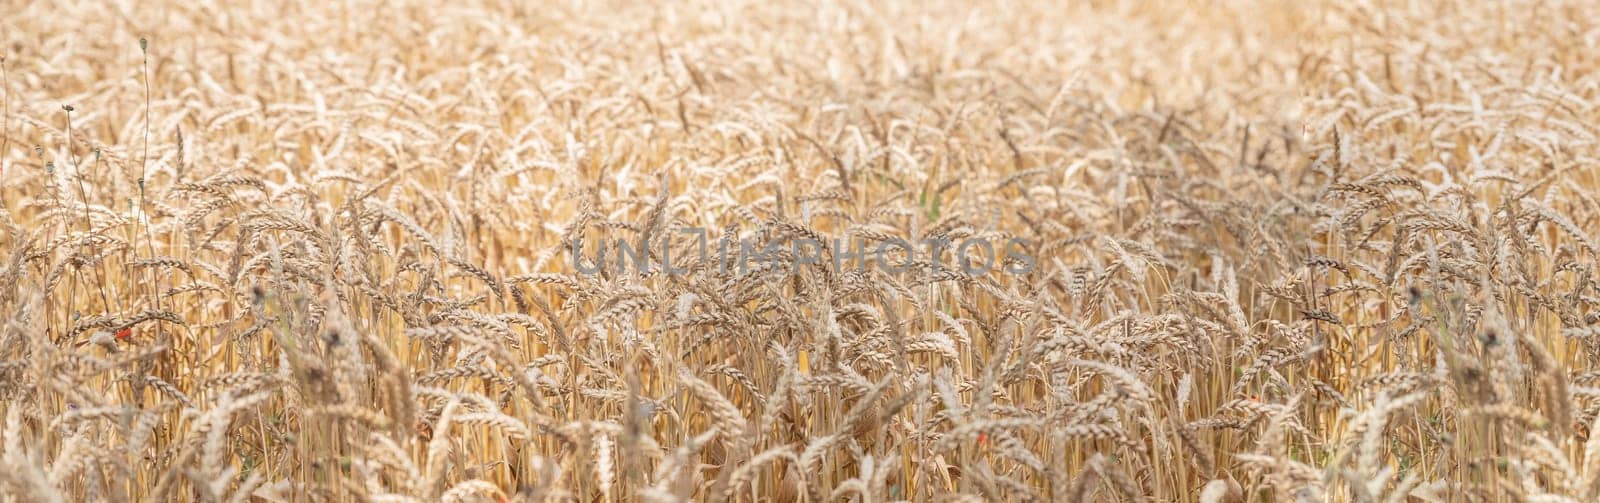 Golden ripe ears of wheat on nature in summer field at sunset rays of sunshine, close-up macro.